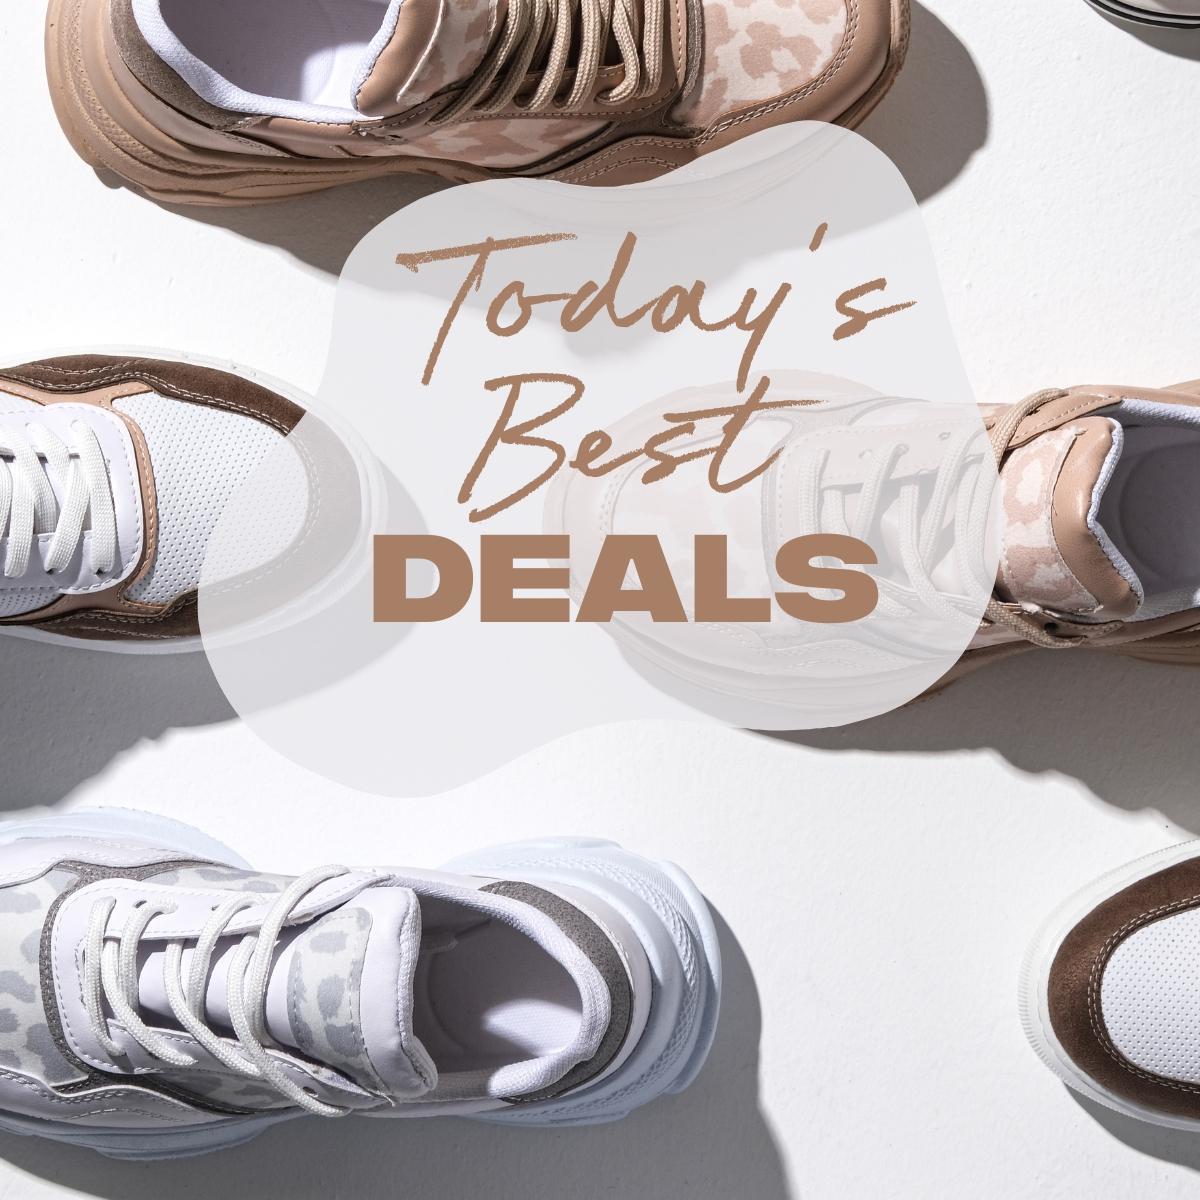 Save 40% on Skechers, 70% on Tan-Luxe, 65% on Reebok & More